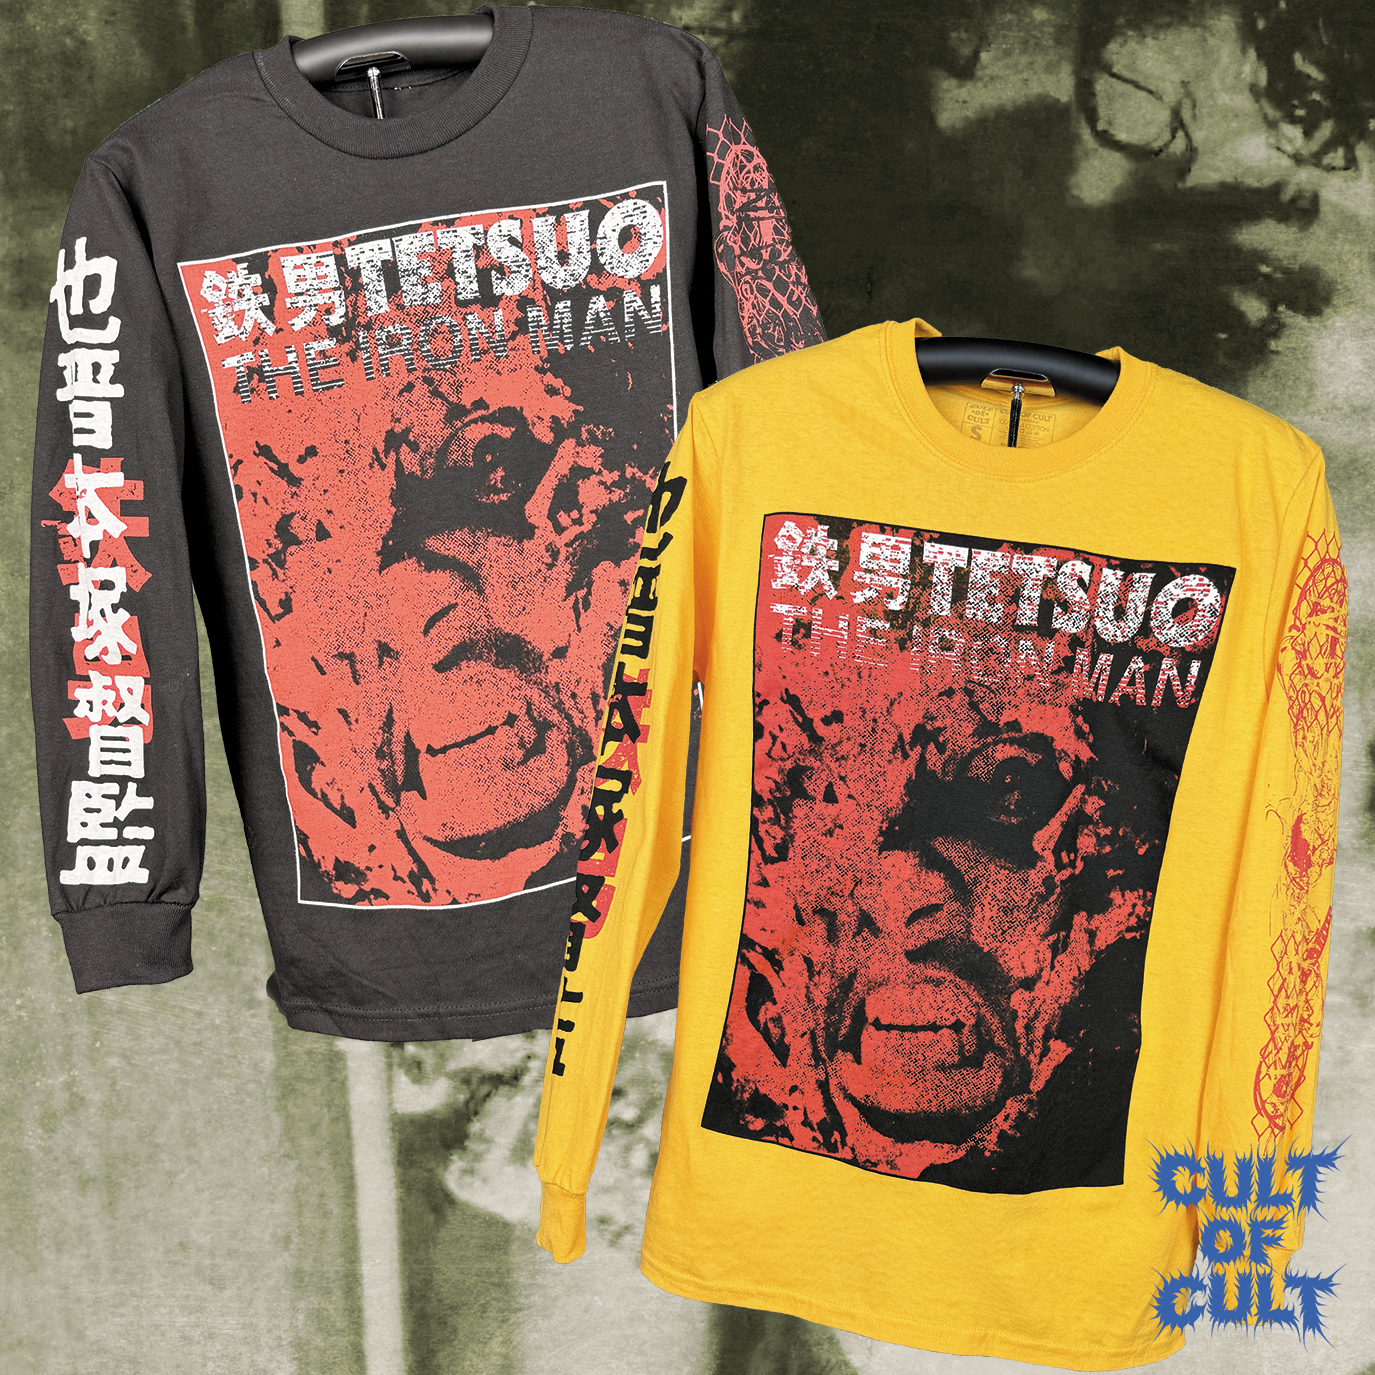 The front of both versions of the shirt. The yellow and black shirt both feature a distorted black and red image of the main character. The top of each shirt reads "Tetsuo The Iron Man" with Japanese characters for the movie title and director name.